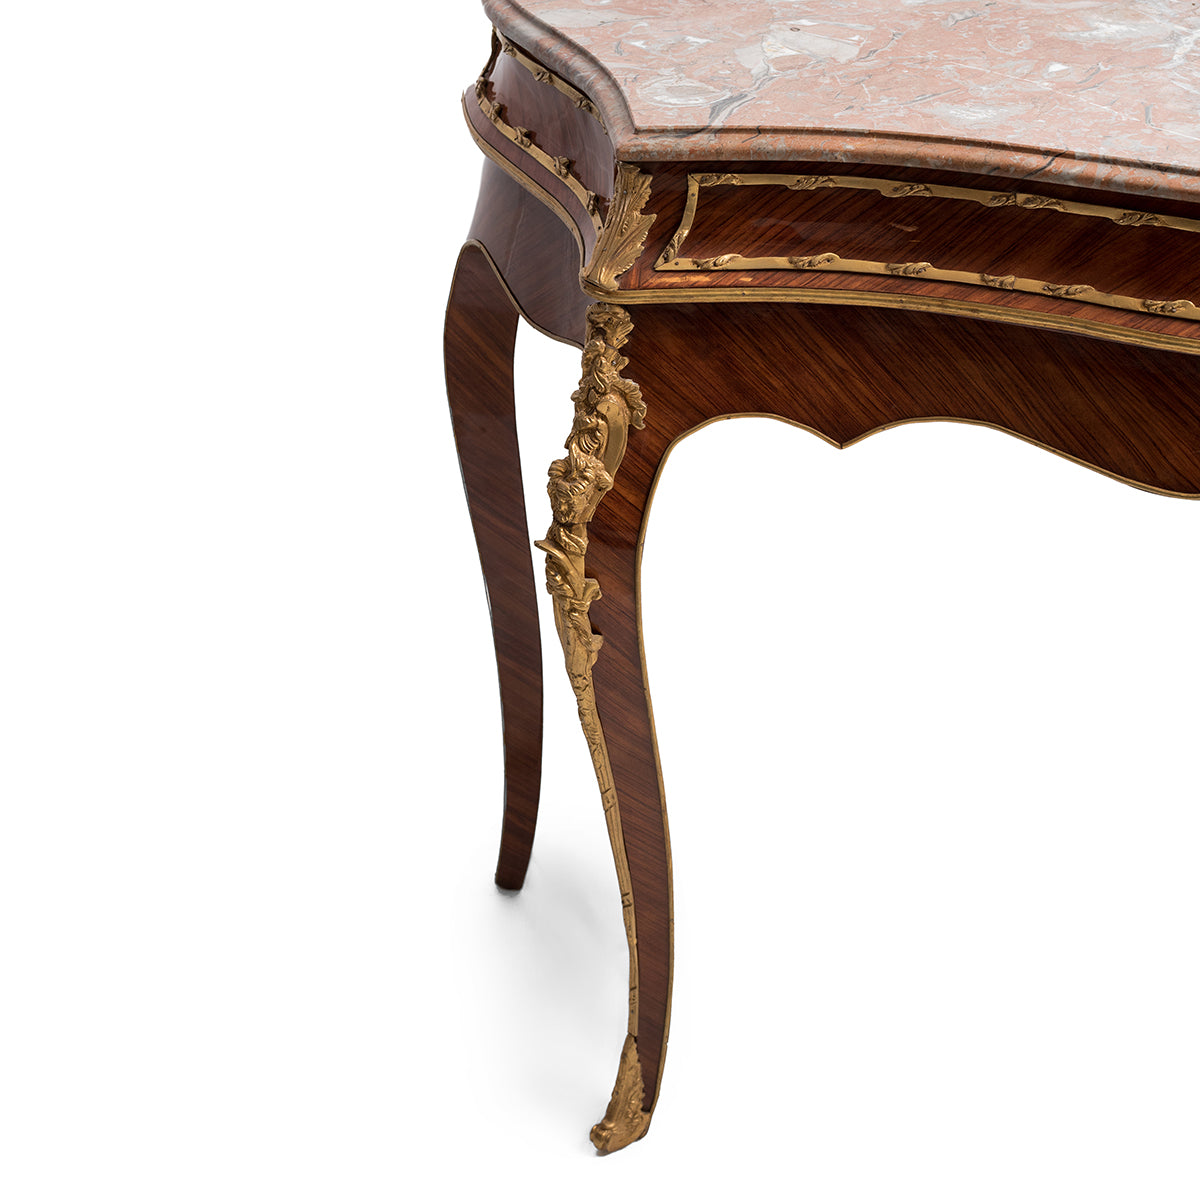 French Empire console table with marble top